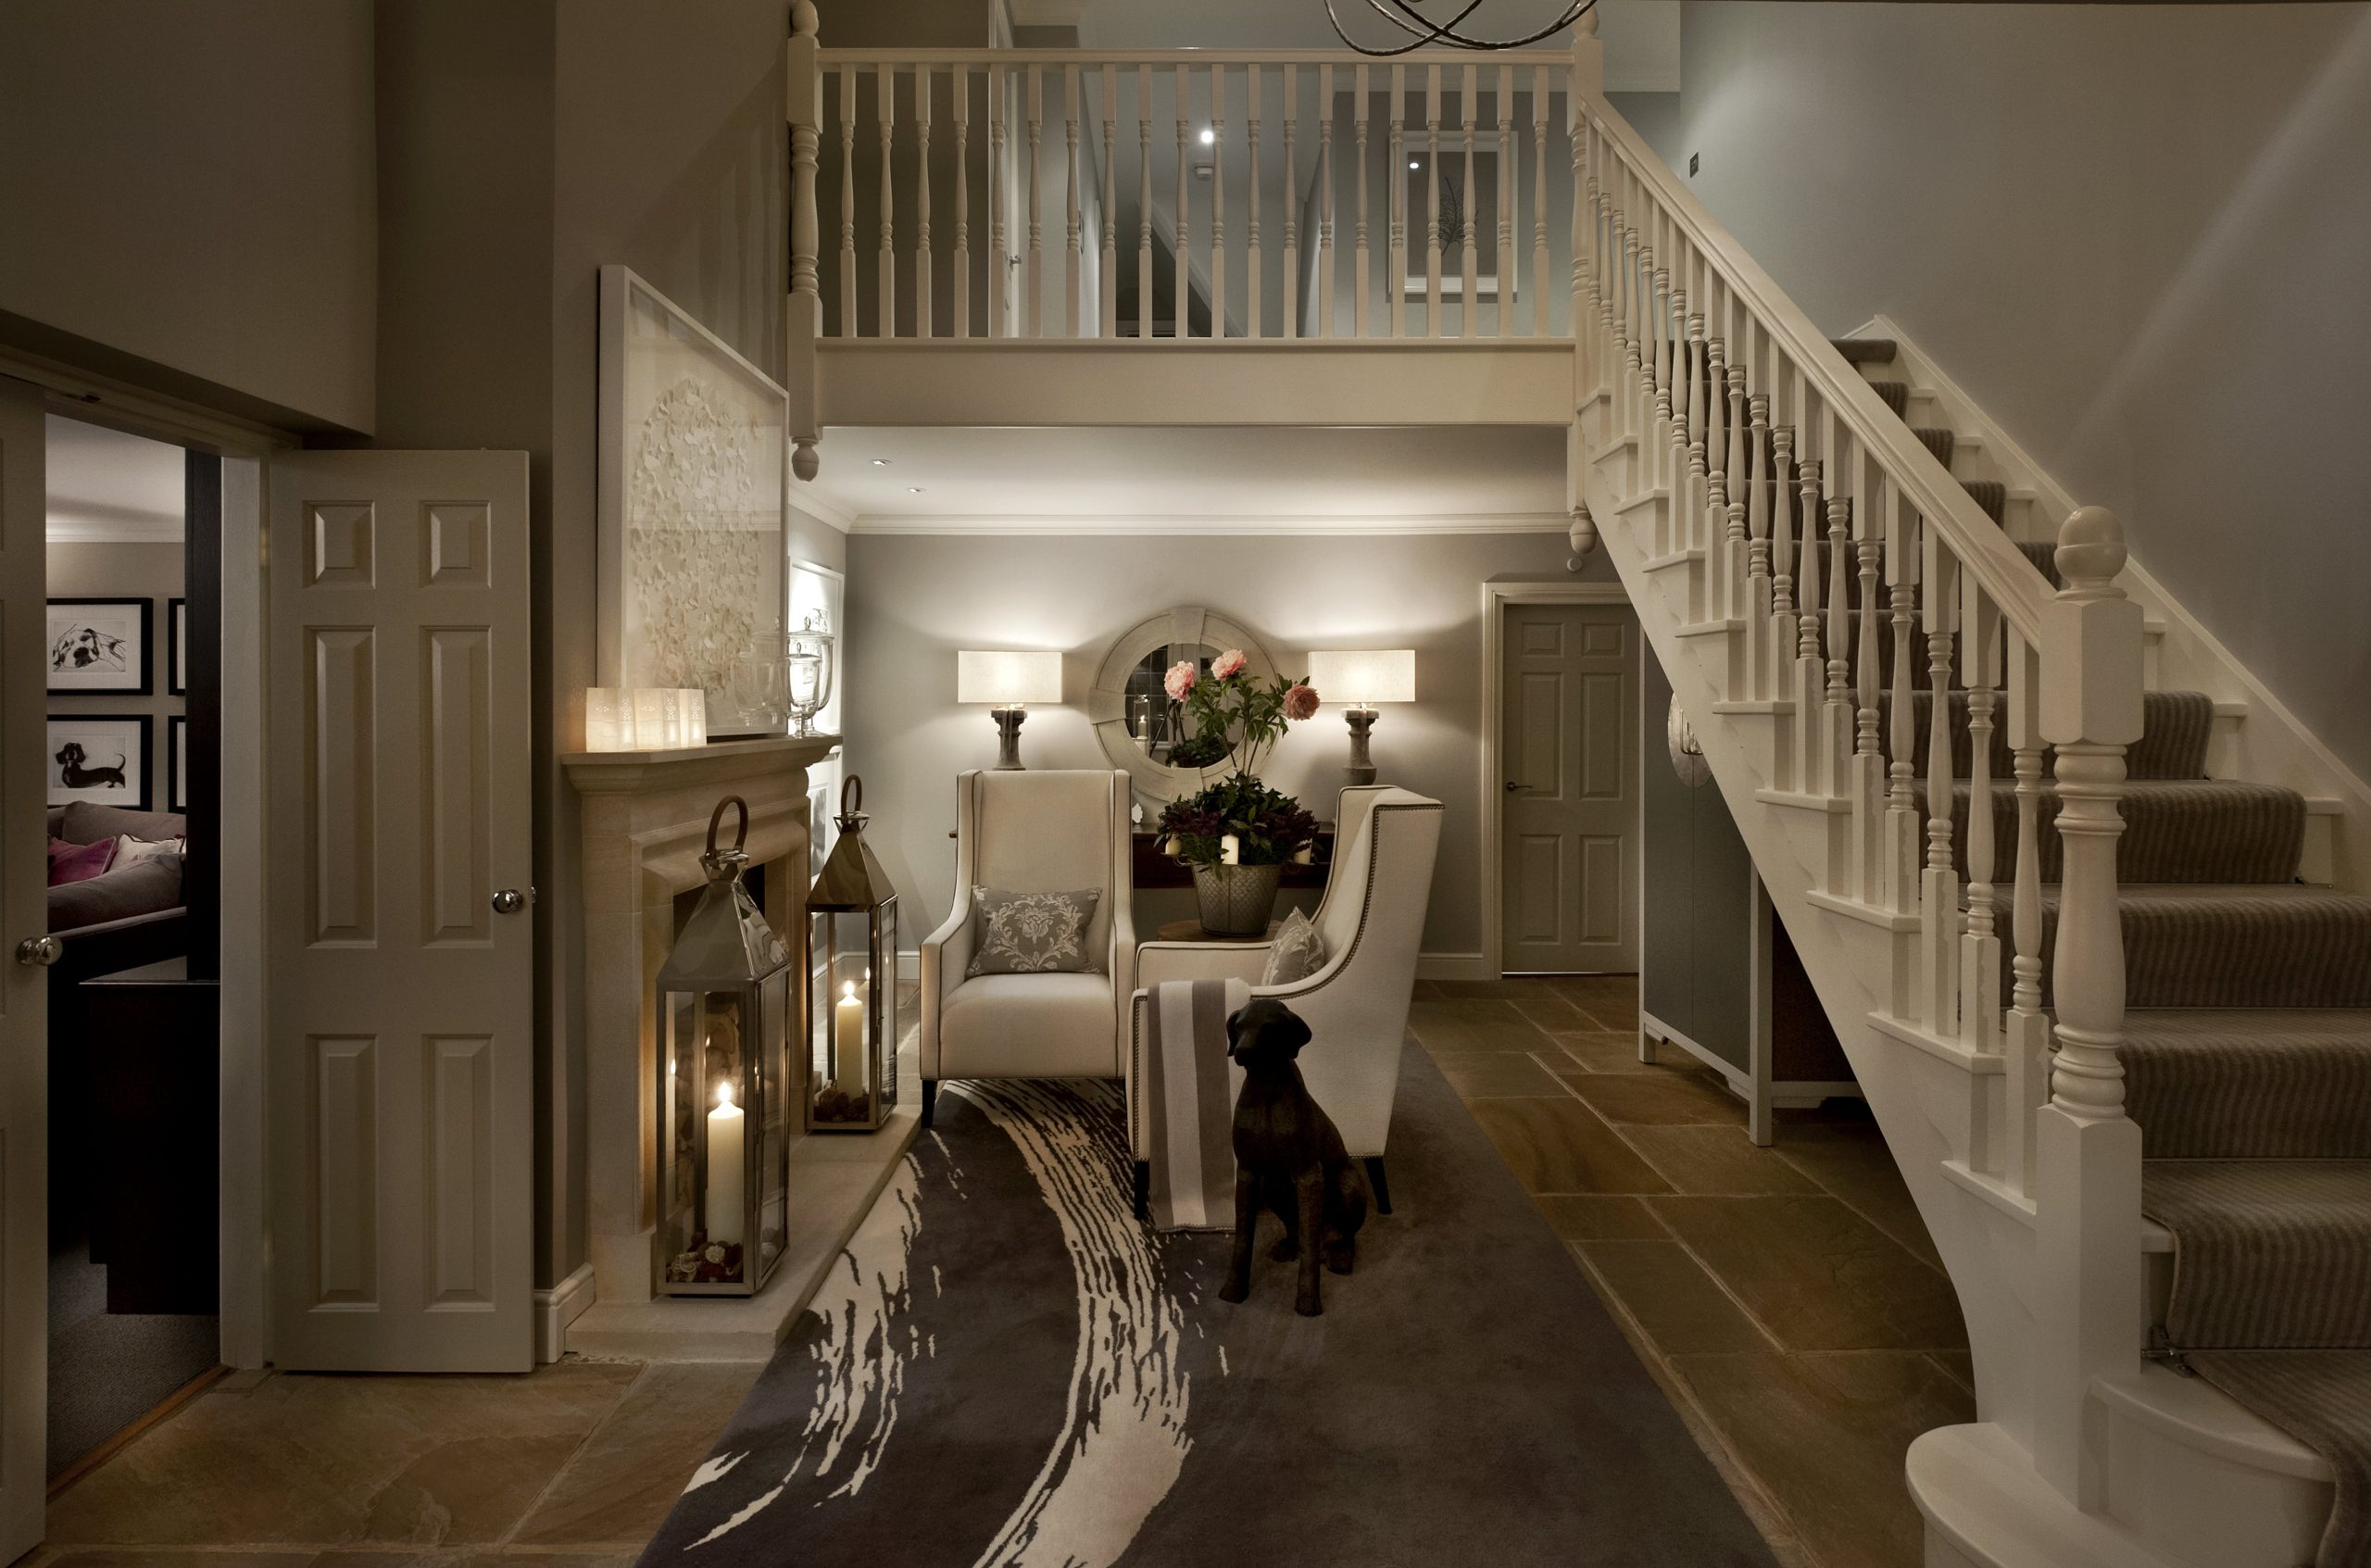 Stunning and welcoming entrance interior design with open staircase and fireplace with soft lighting